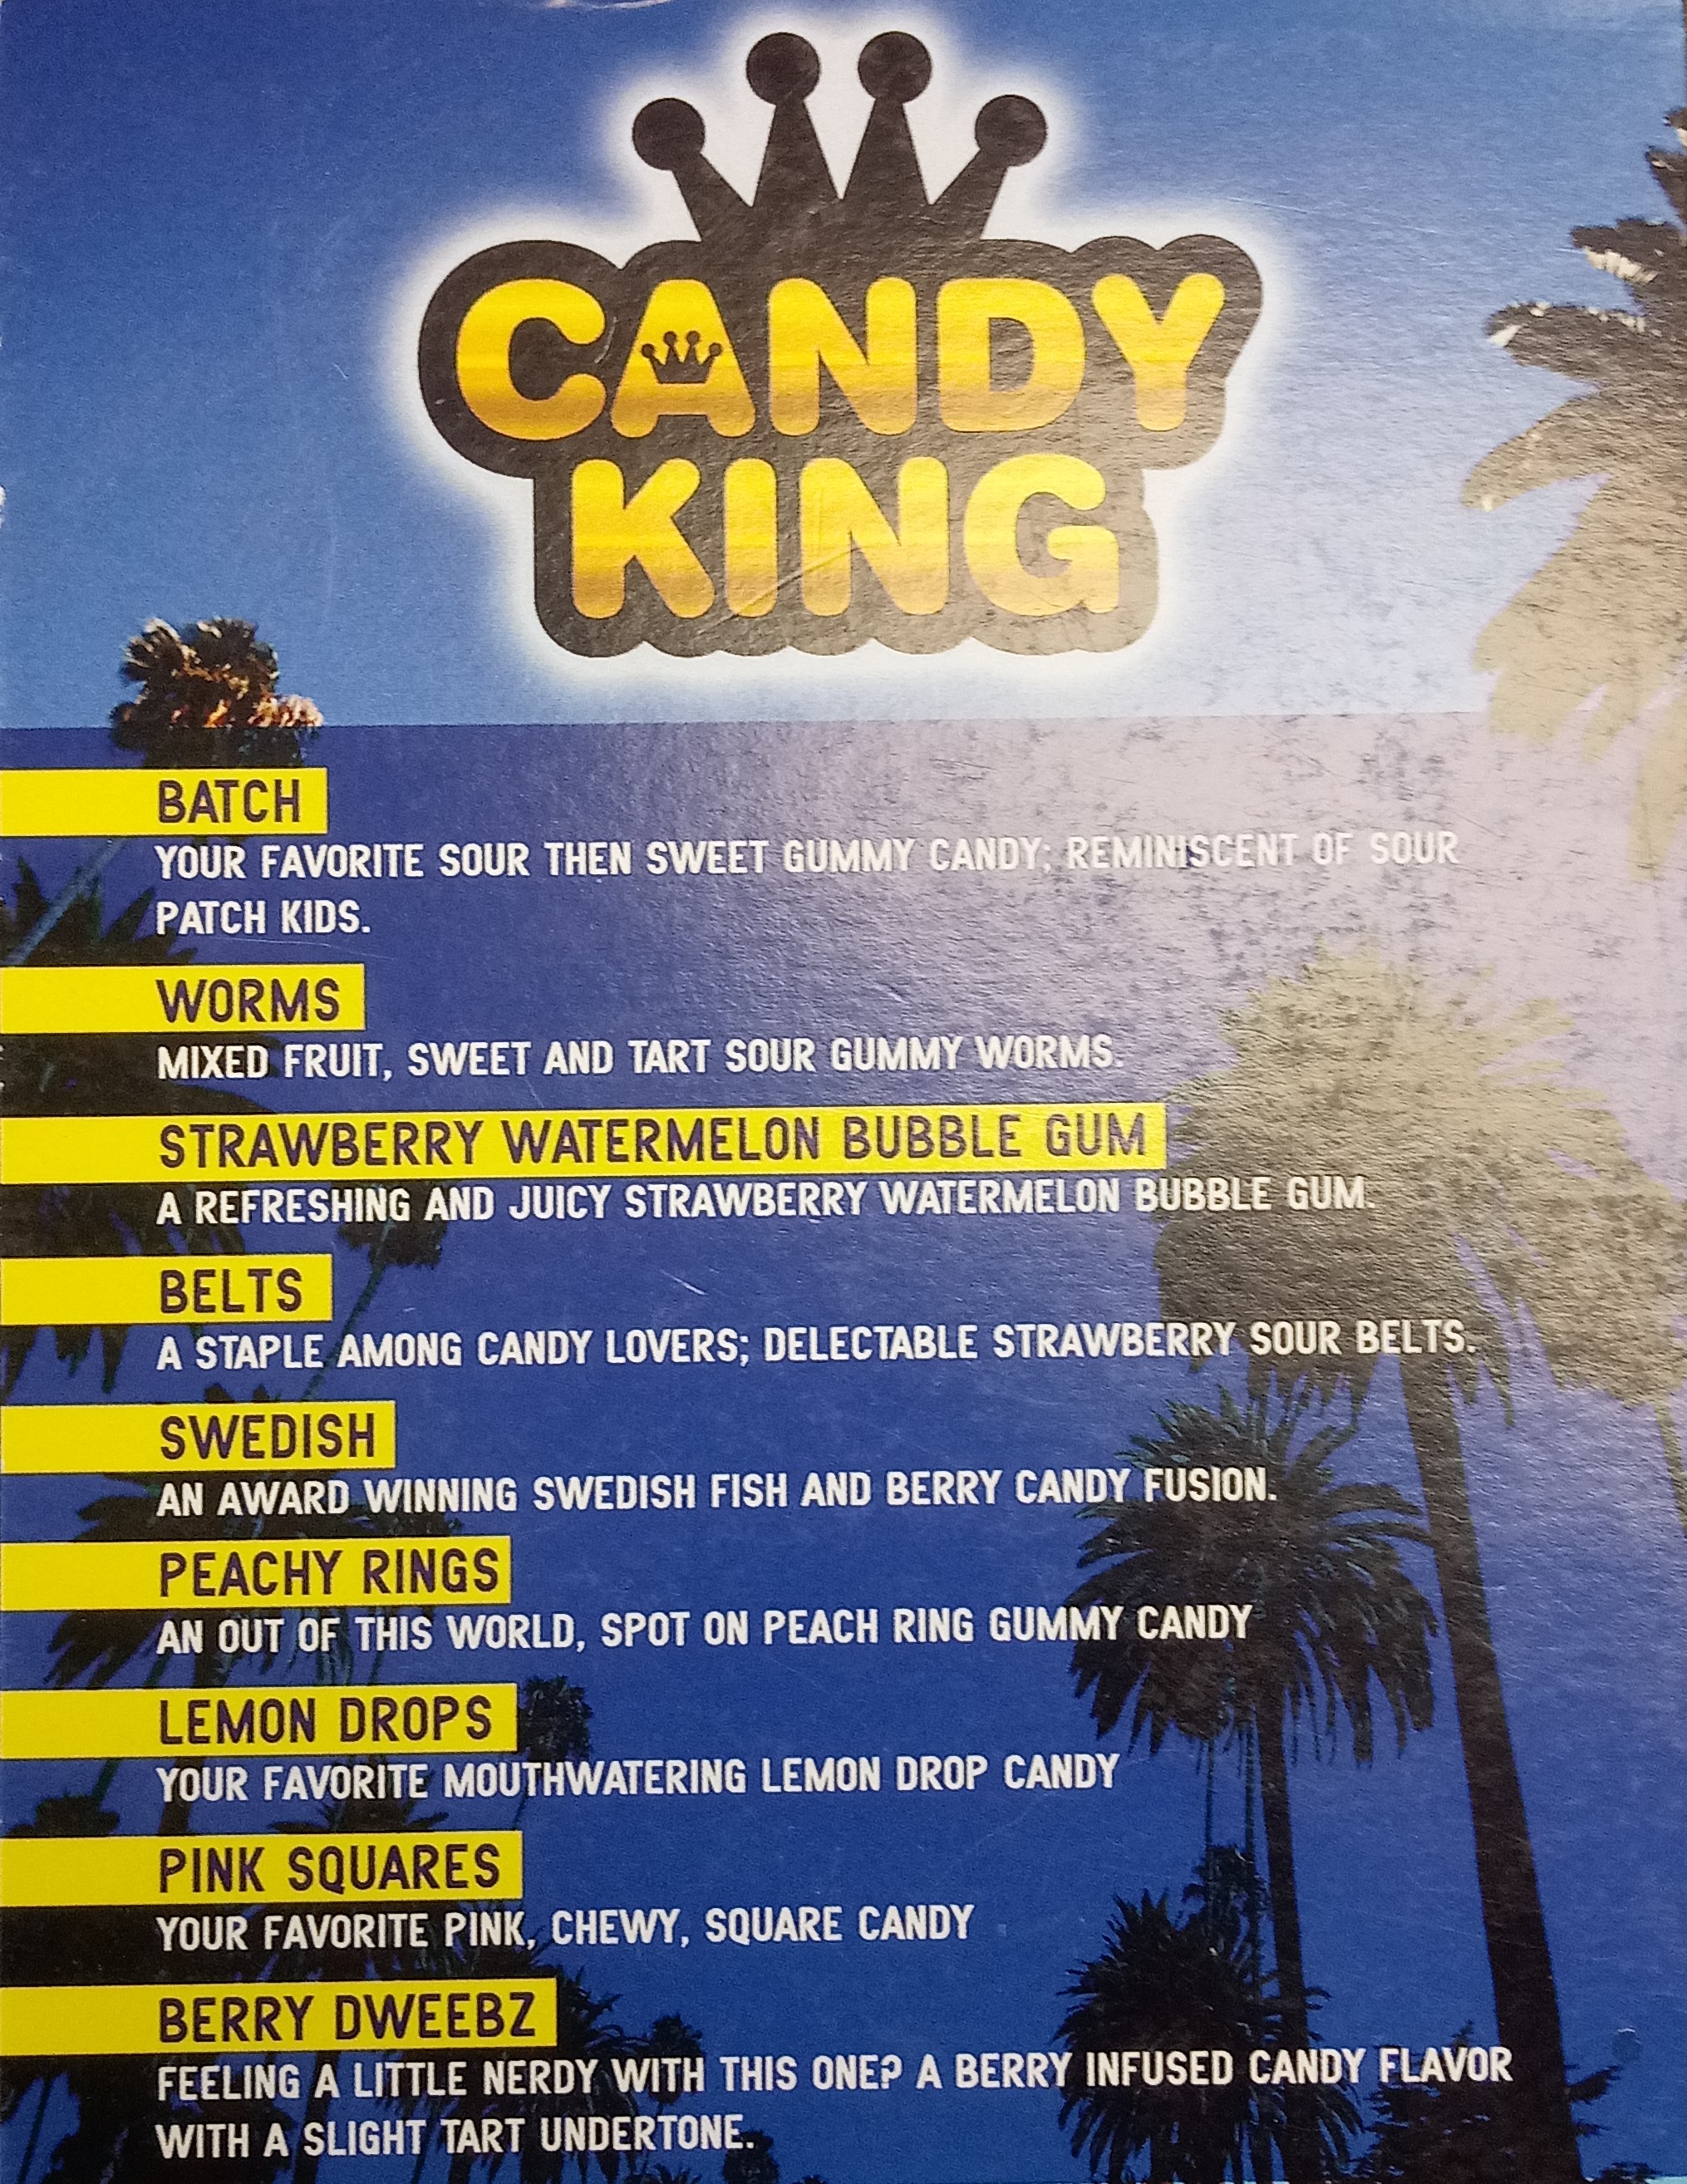 CandyKing Ad